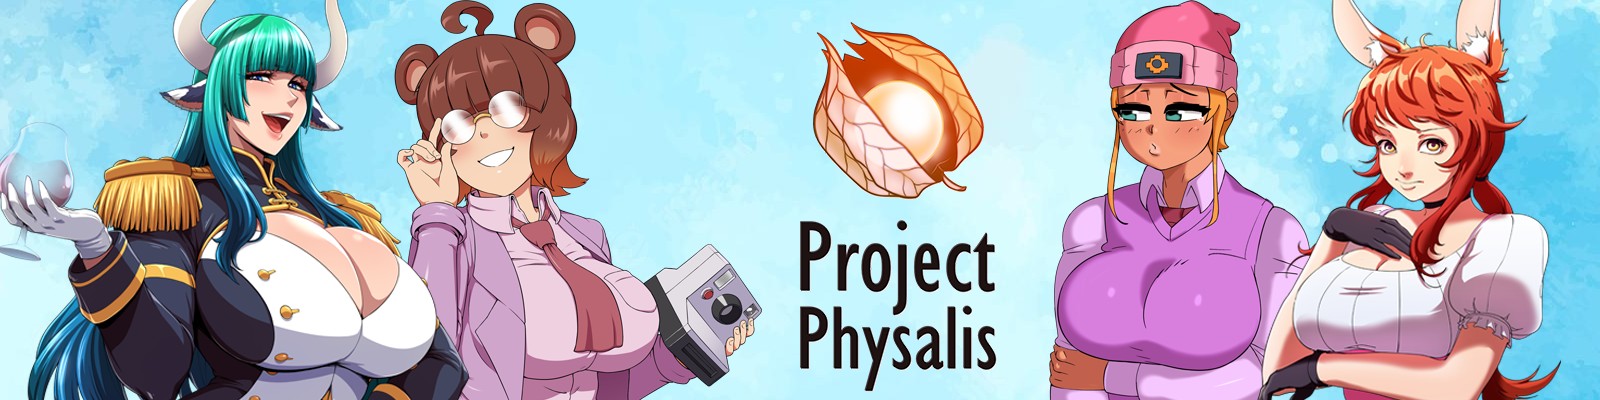 Project Physalis Game Collection Adult Game Android Apk Download (3)